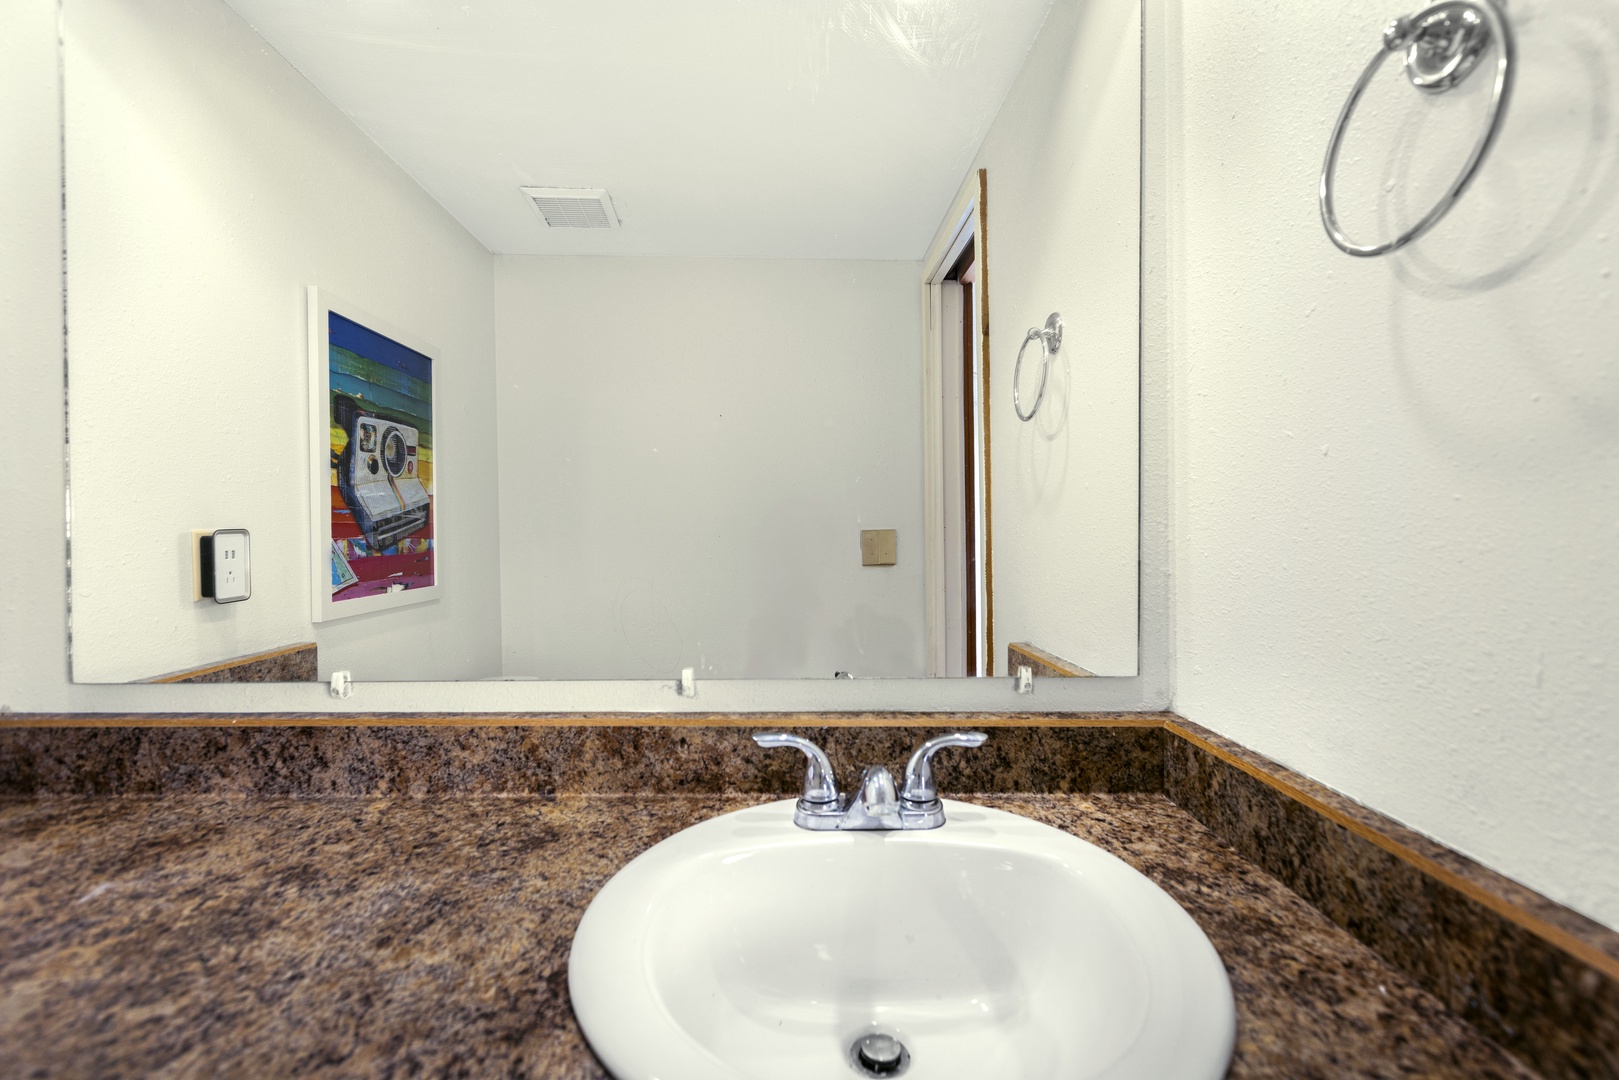 Enjoy the convenience of a half bath, available in the upper-level loft area